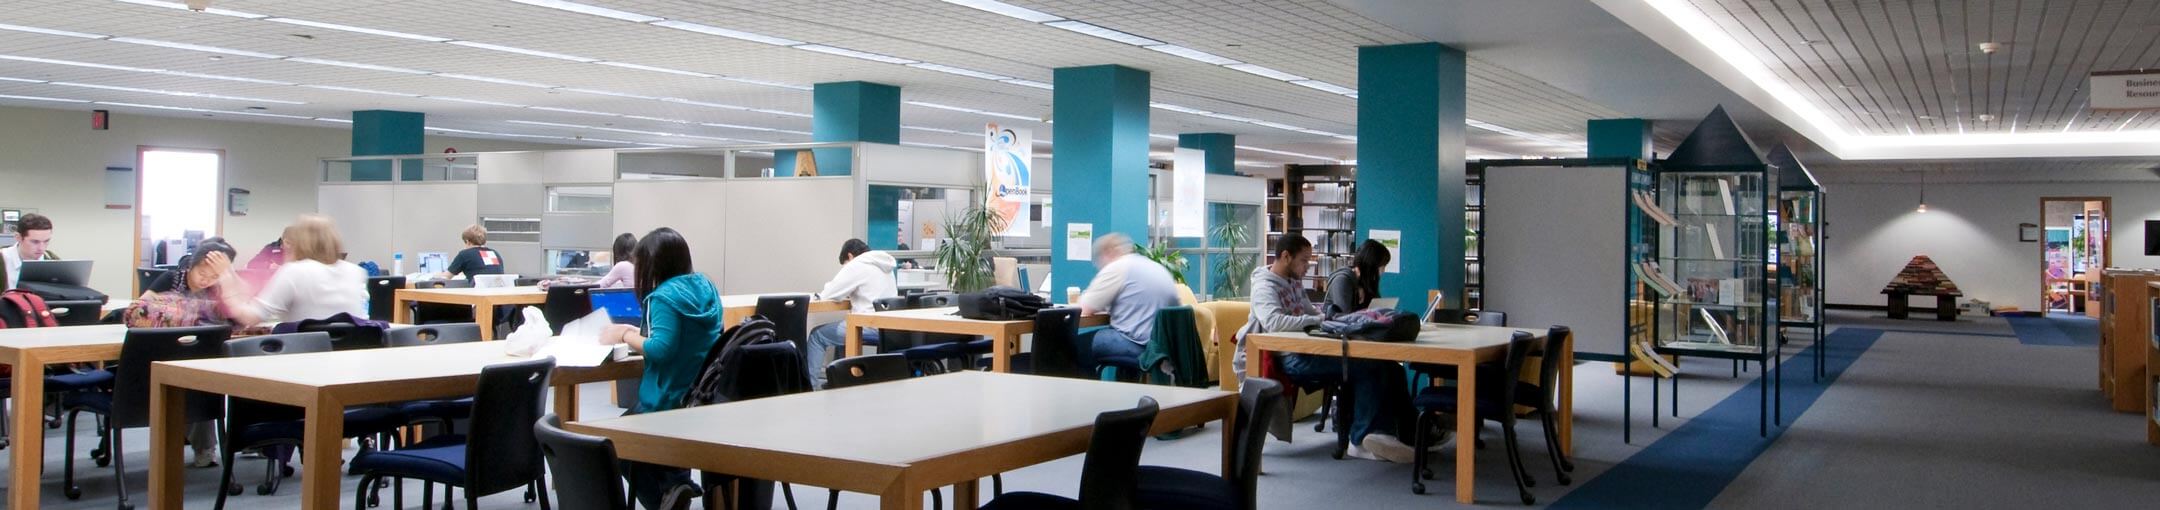 Students studying and working on projects in the library